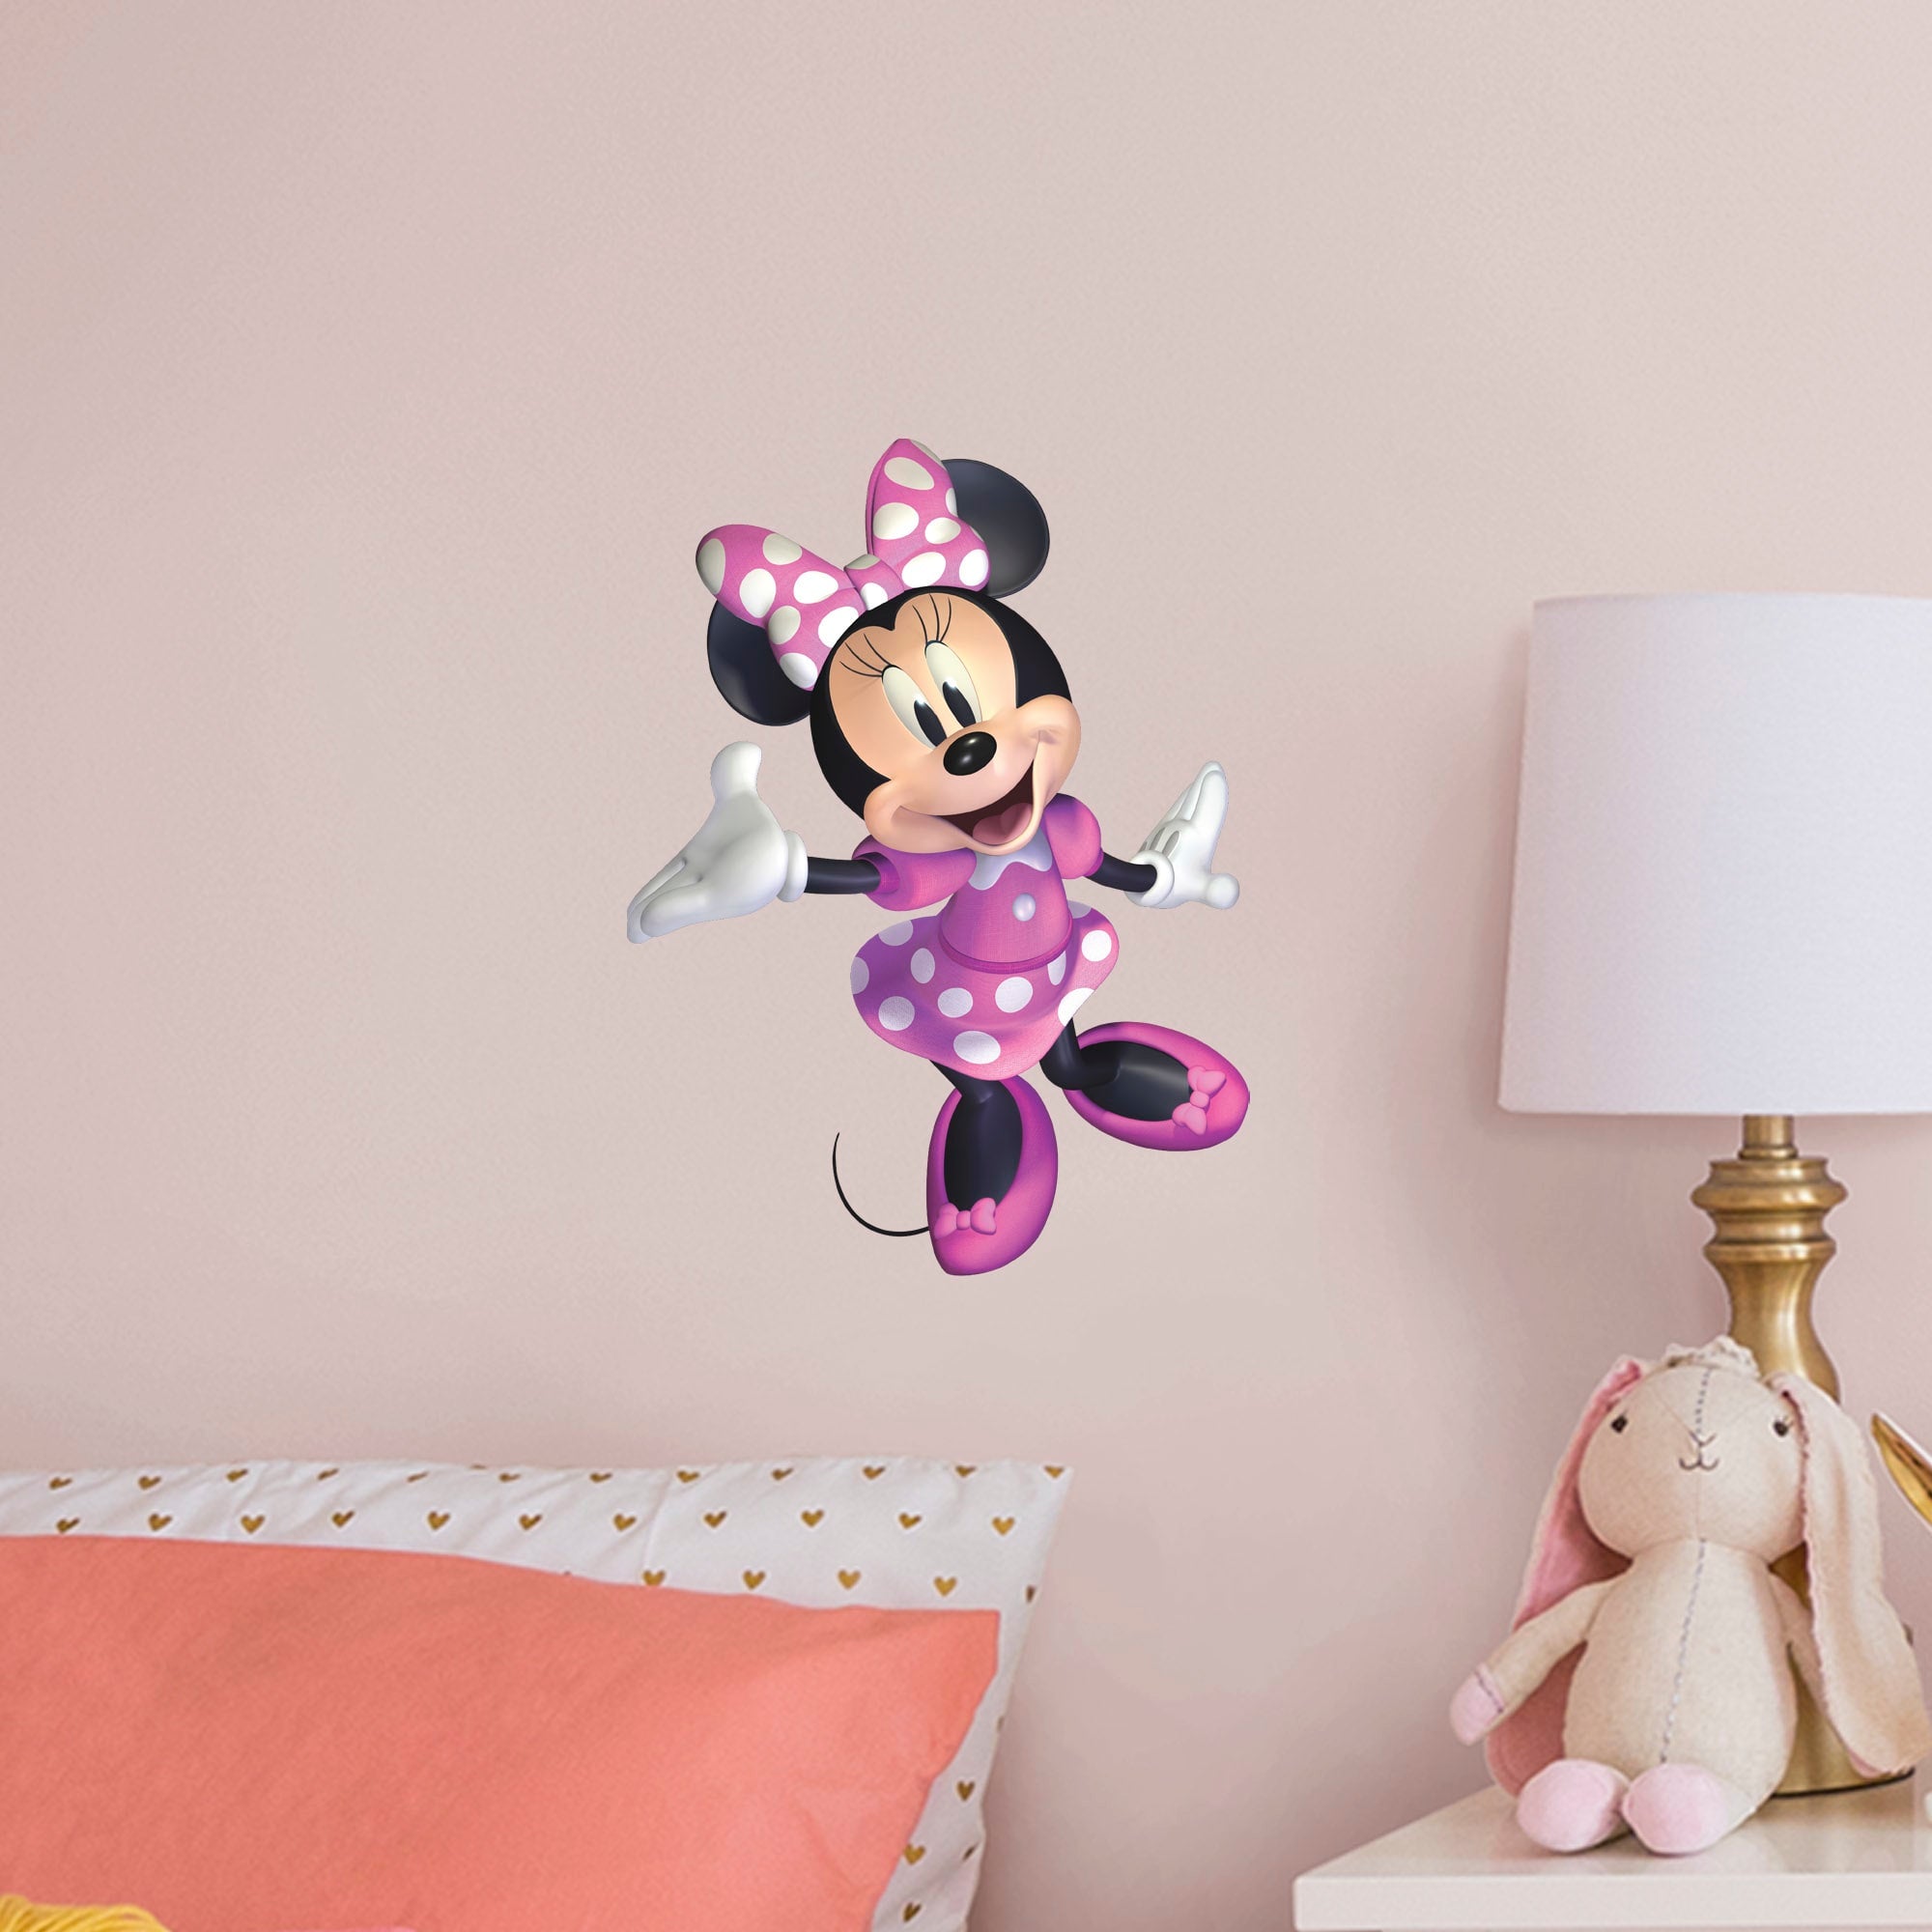 Minnie Mouse - Officially Licensed Disney Removable Wall Decal Large by Fathead | Vinyl